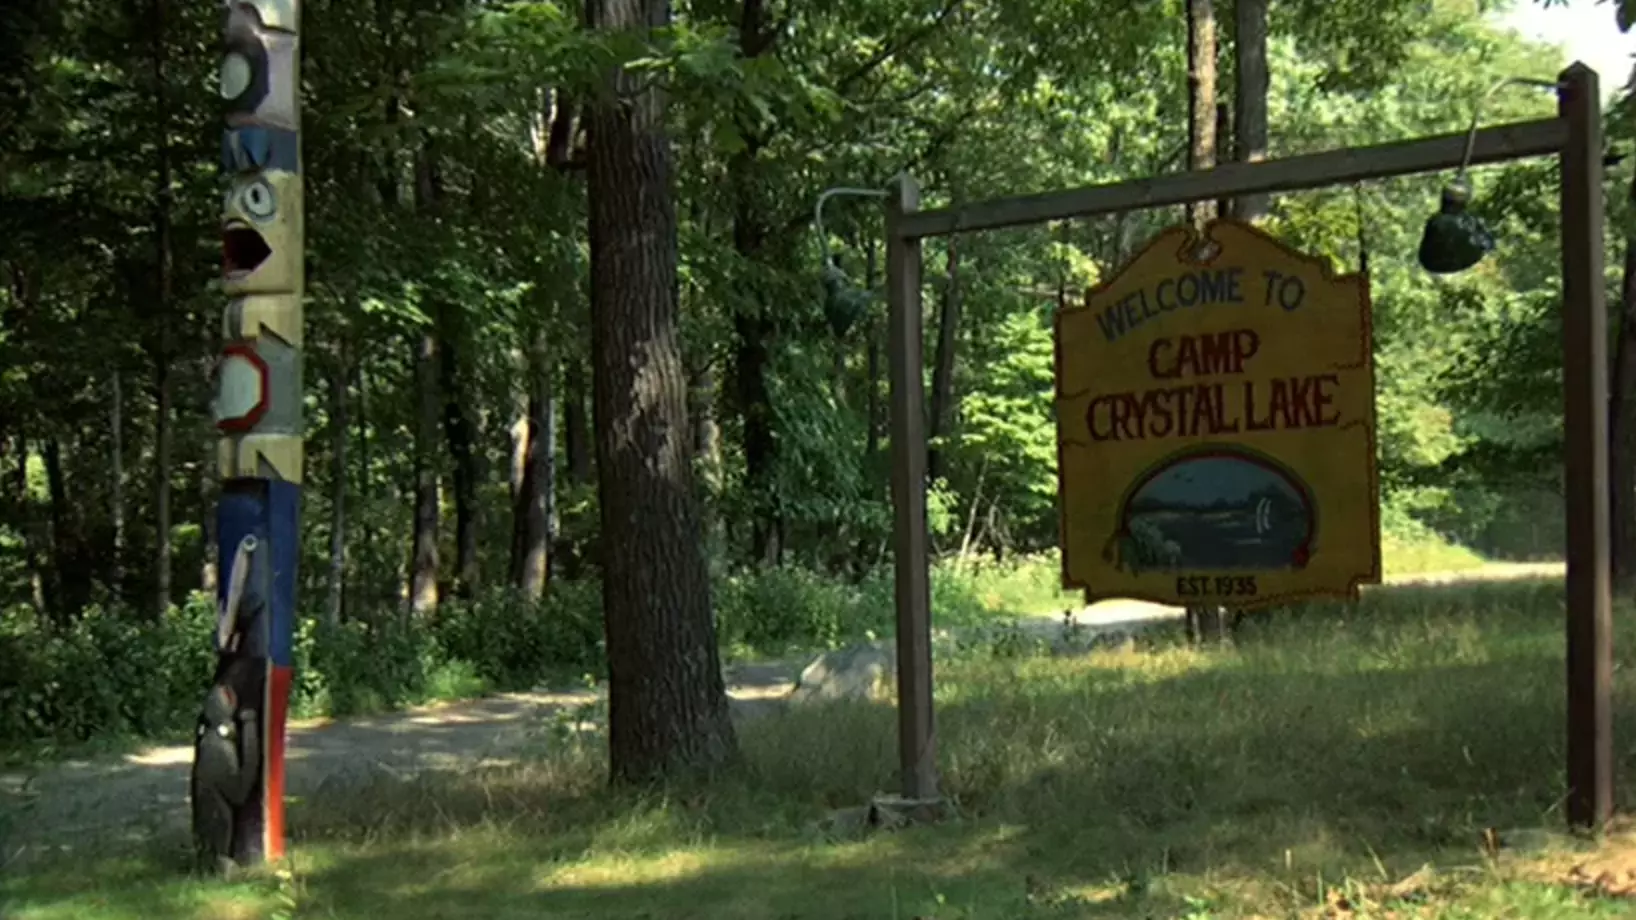 Step Into Your Nightmares And Take A Tour Of Friday The 13th's Camp Crystal Lake